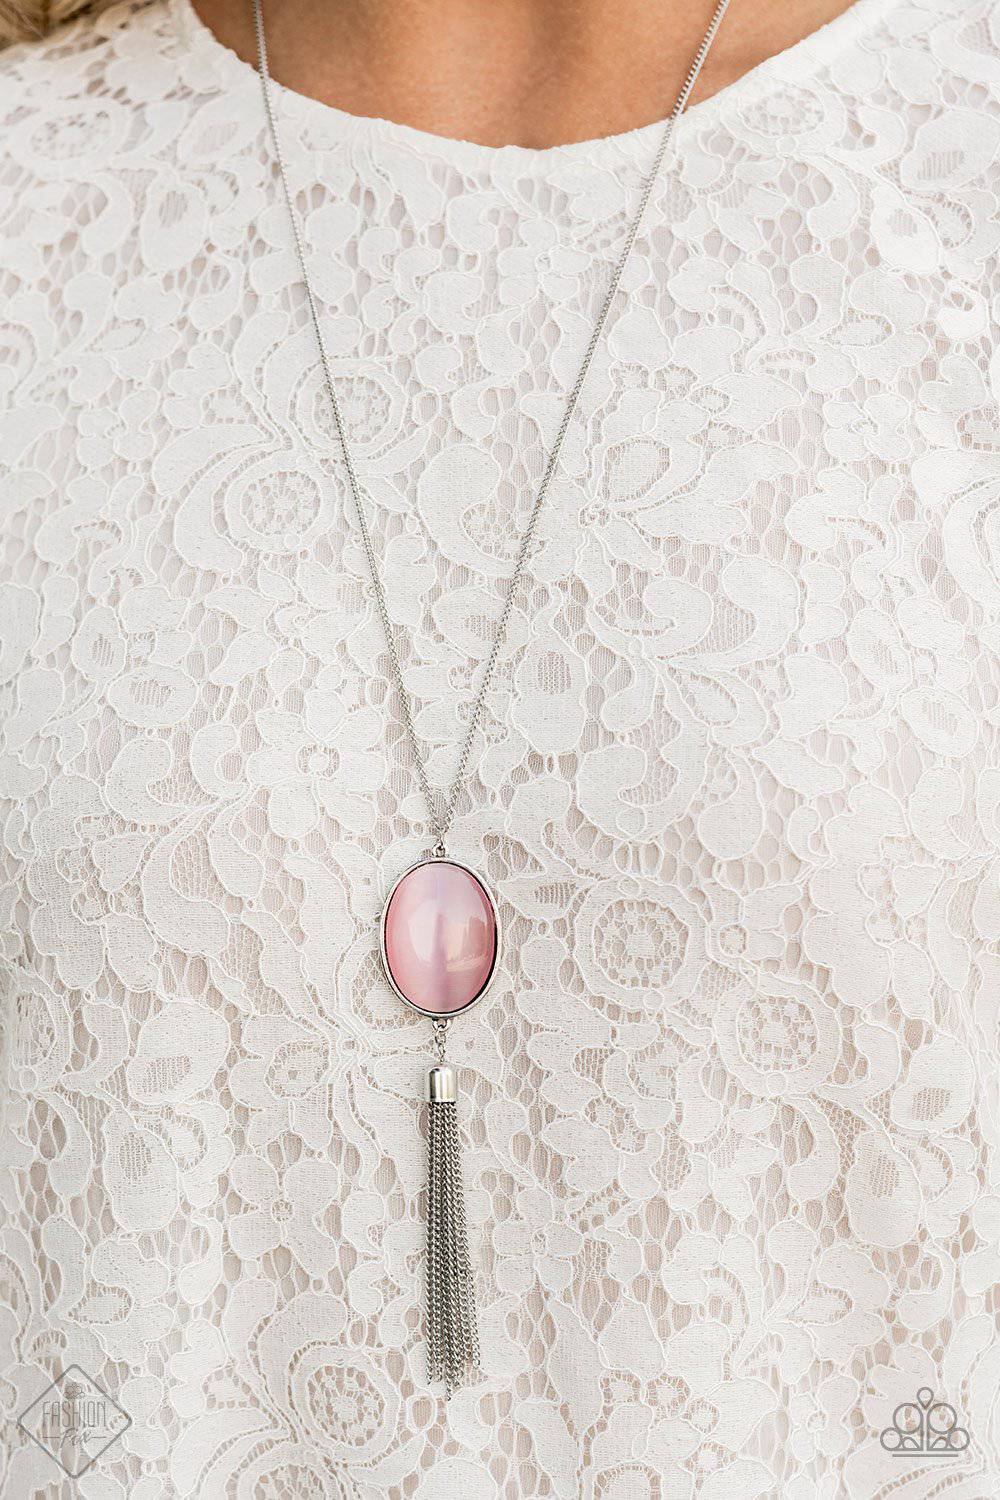 Tasseled Tranquility - Pink Cat's Eye Necklace - Paparazzi Accessories - GlaMarous Titi Jewels